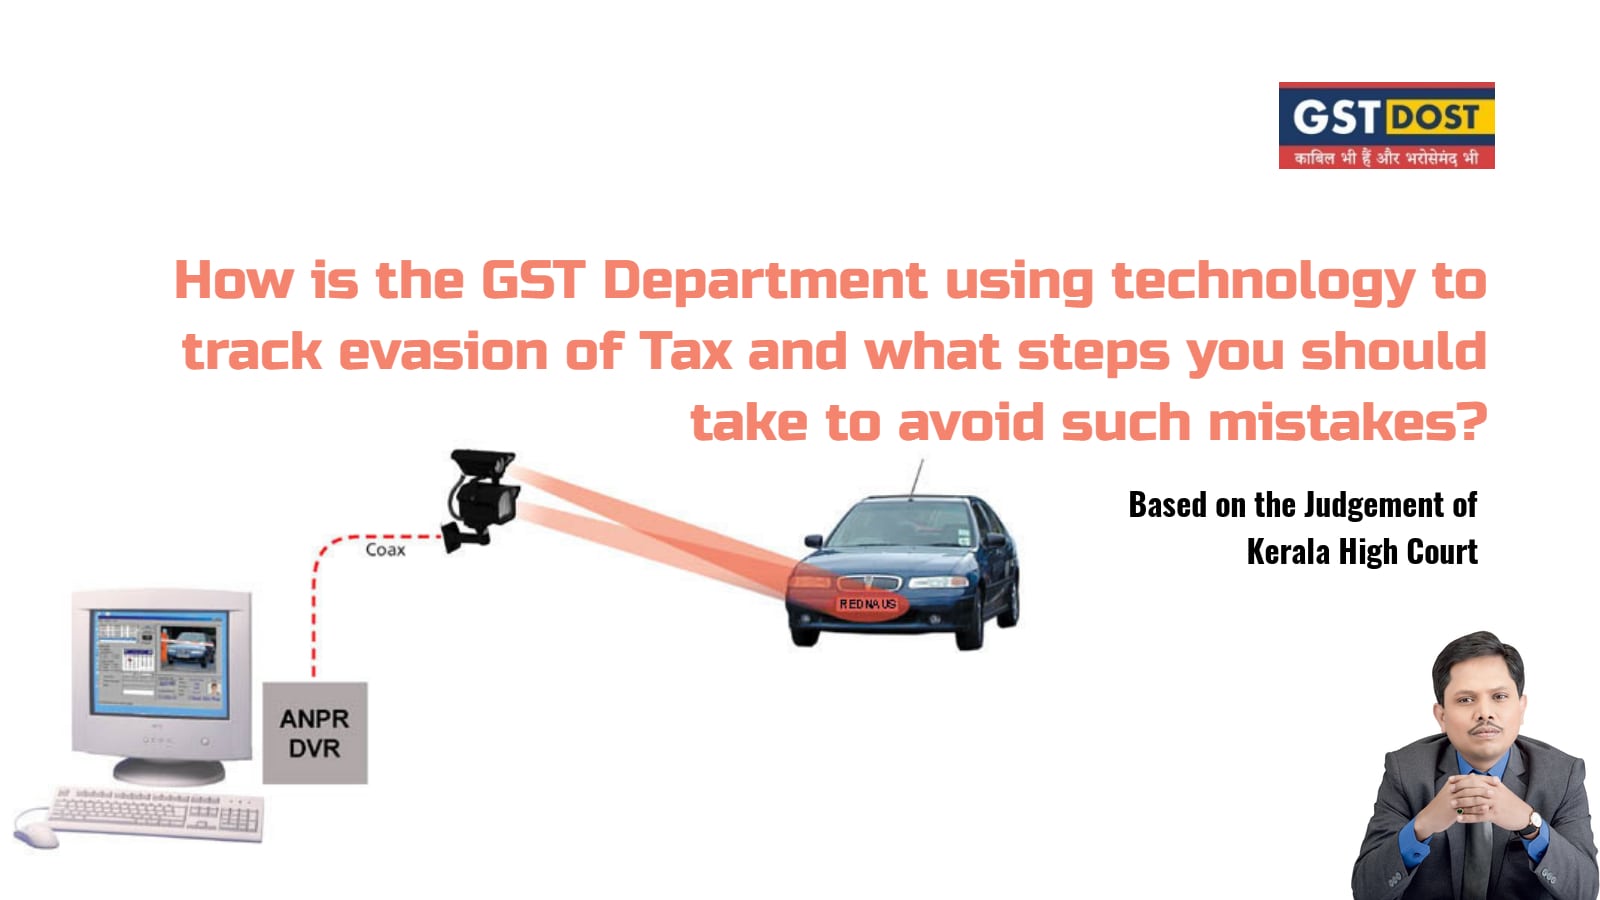 How is GST Dept. using technology to track evasion of tax and what steps you should take to avoid such mistake?